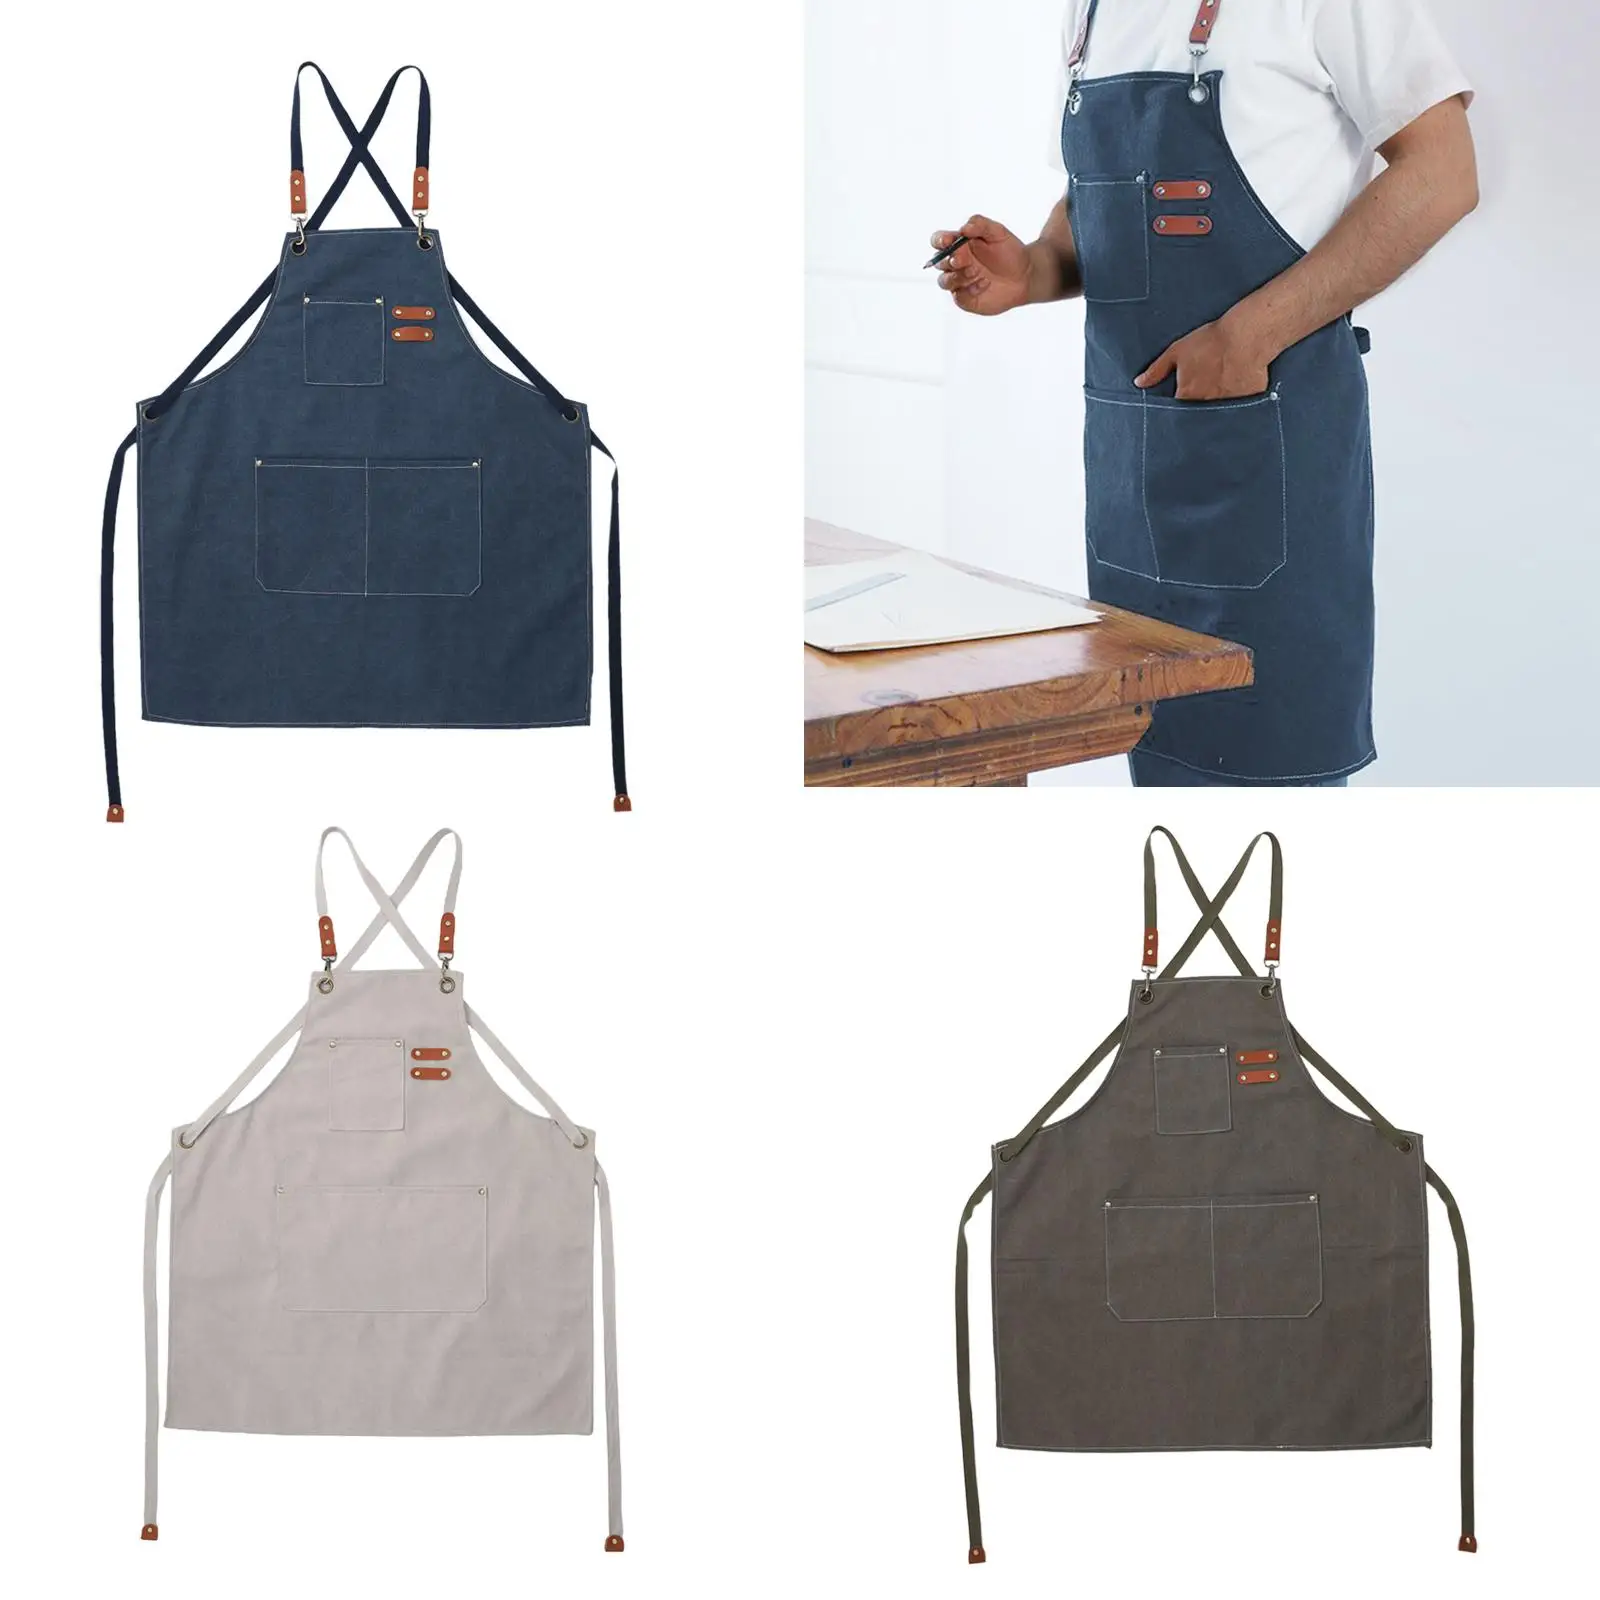 Work Bib Apron Strap Kitchen Cooking Apron for Outdoor Barbecue